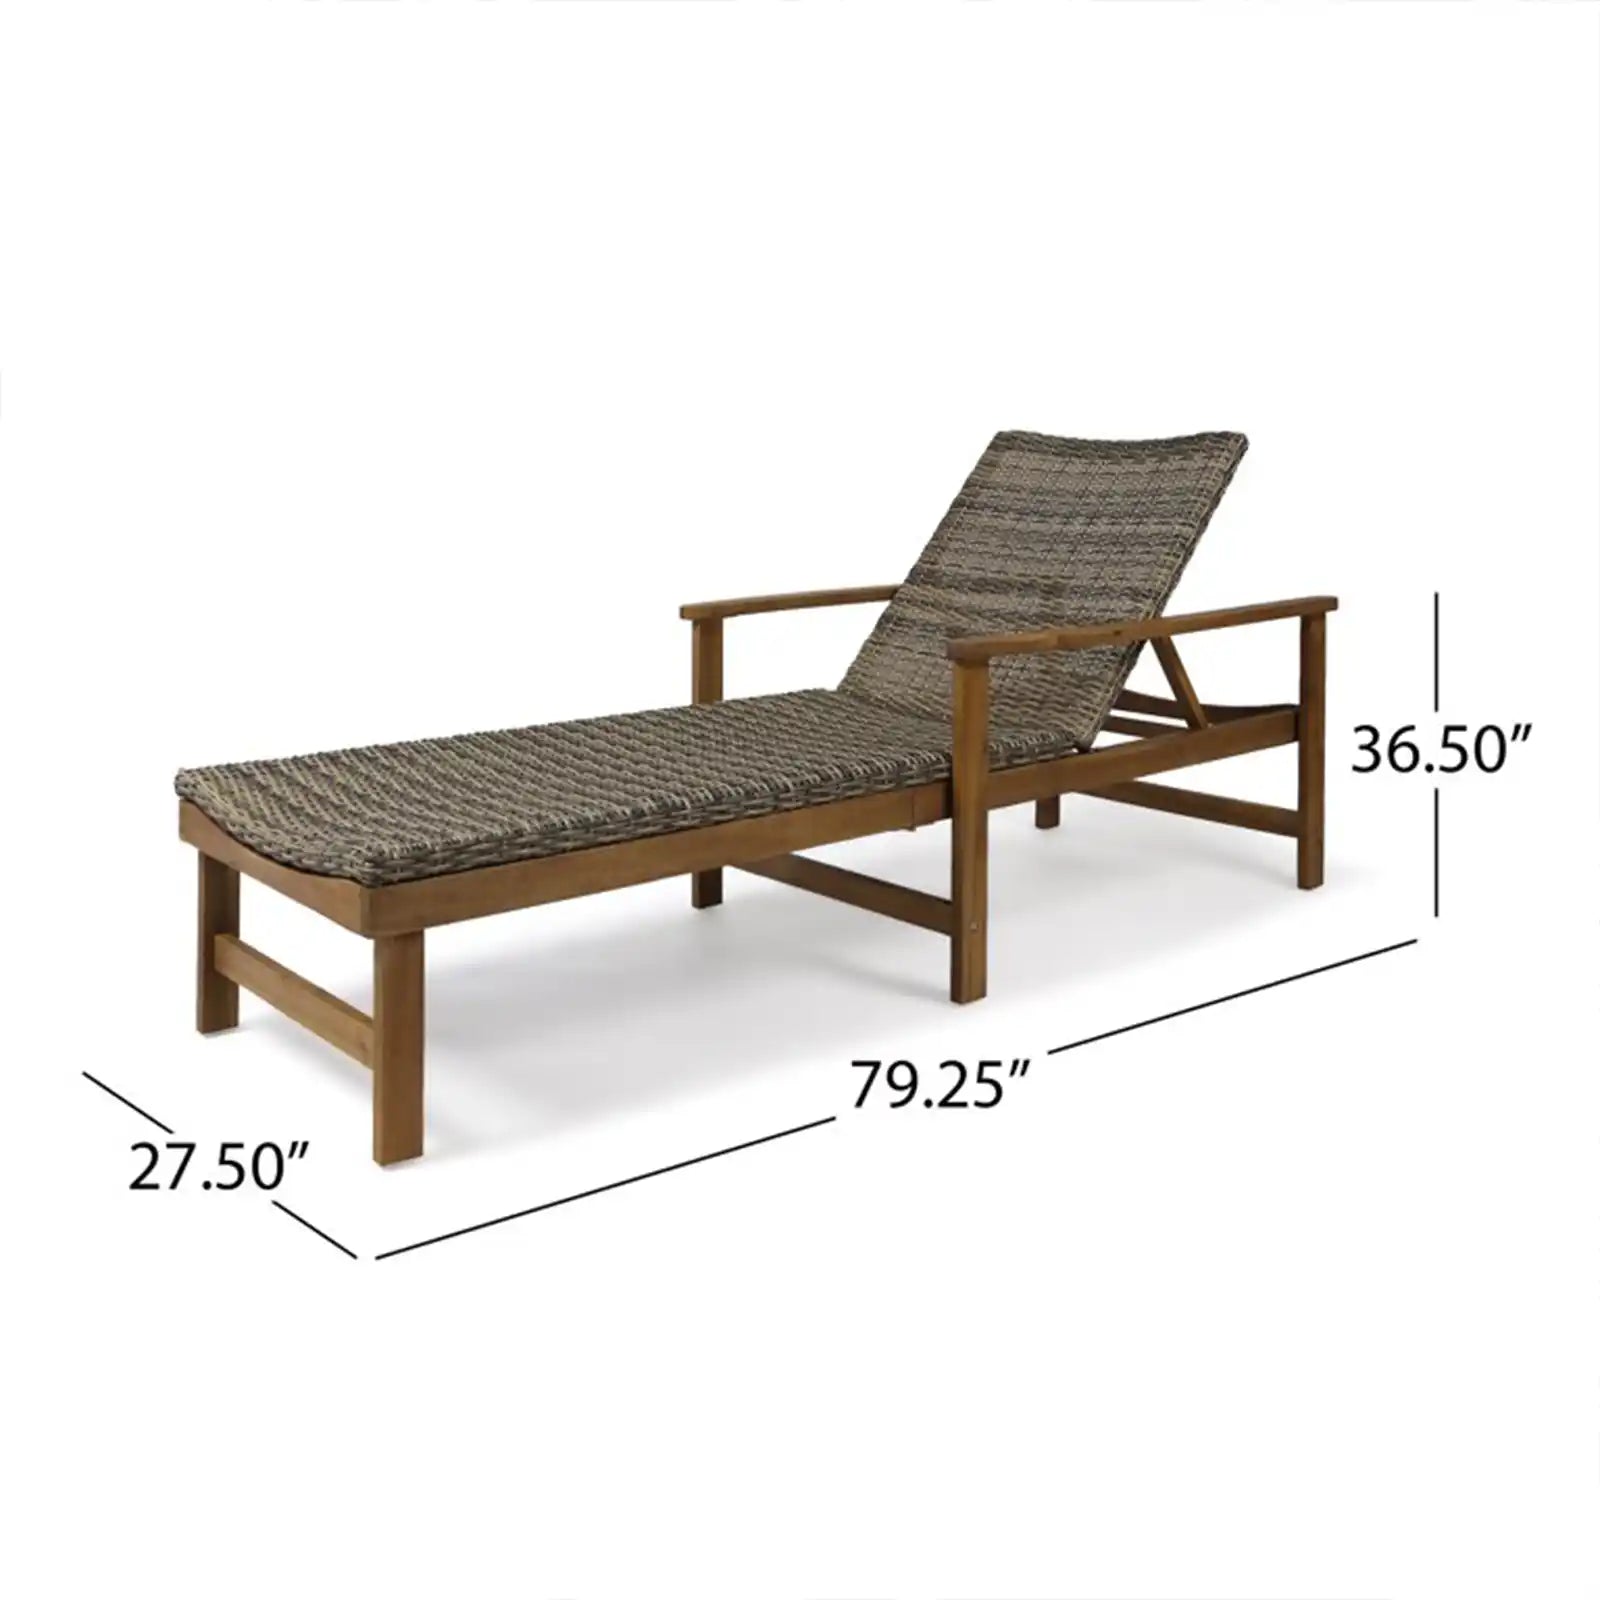 Outdoor Rustic Acacia Wood Chaise Lounge with Wicker Seating